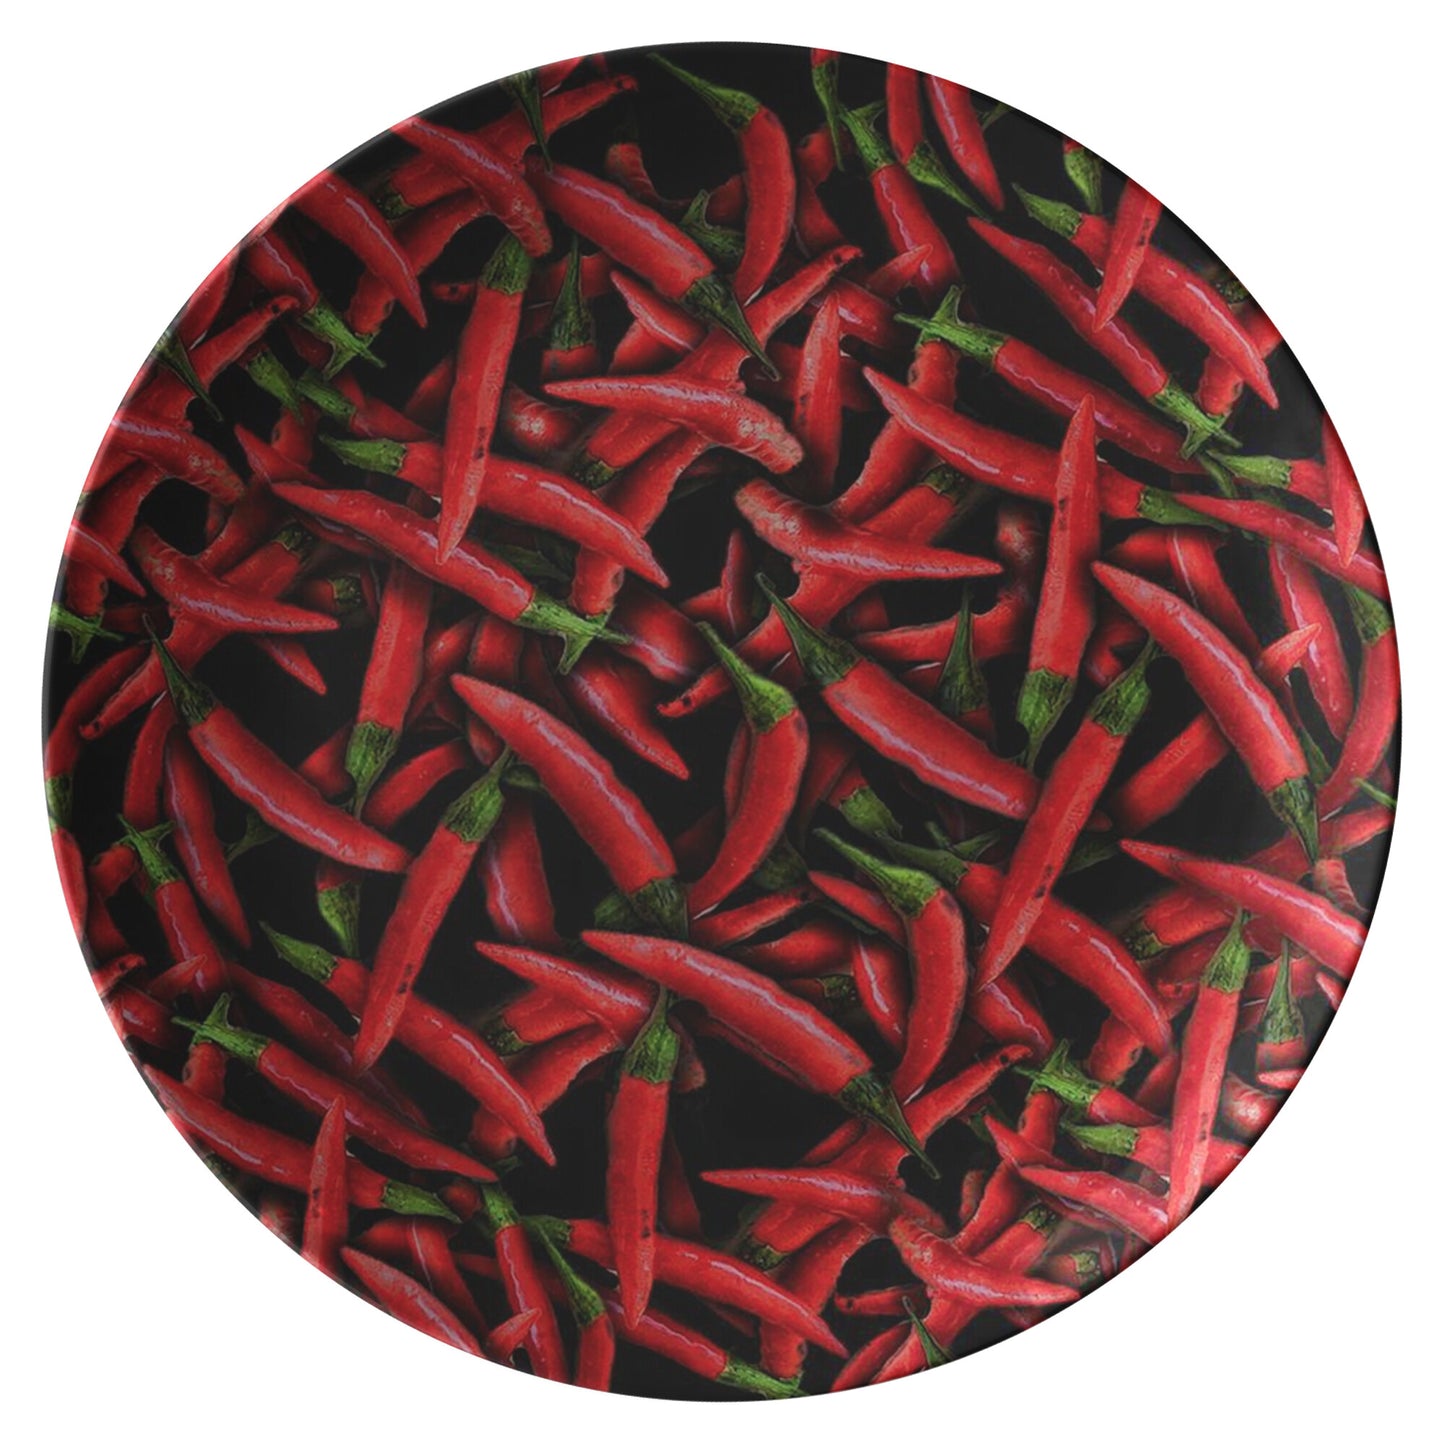 Red Chili Peppers Dinner Plate